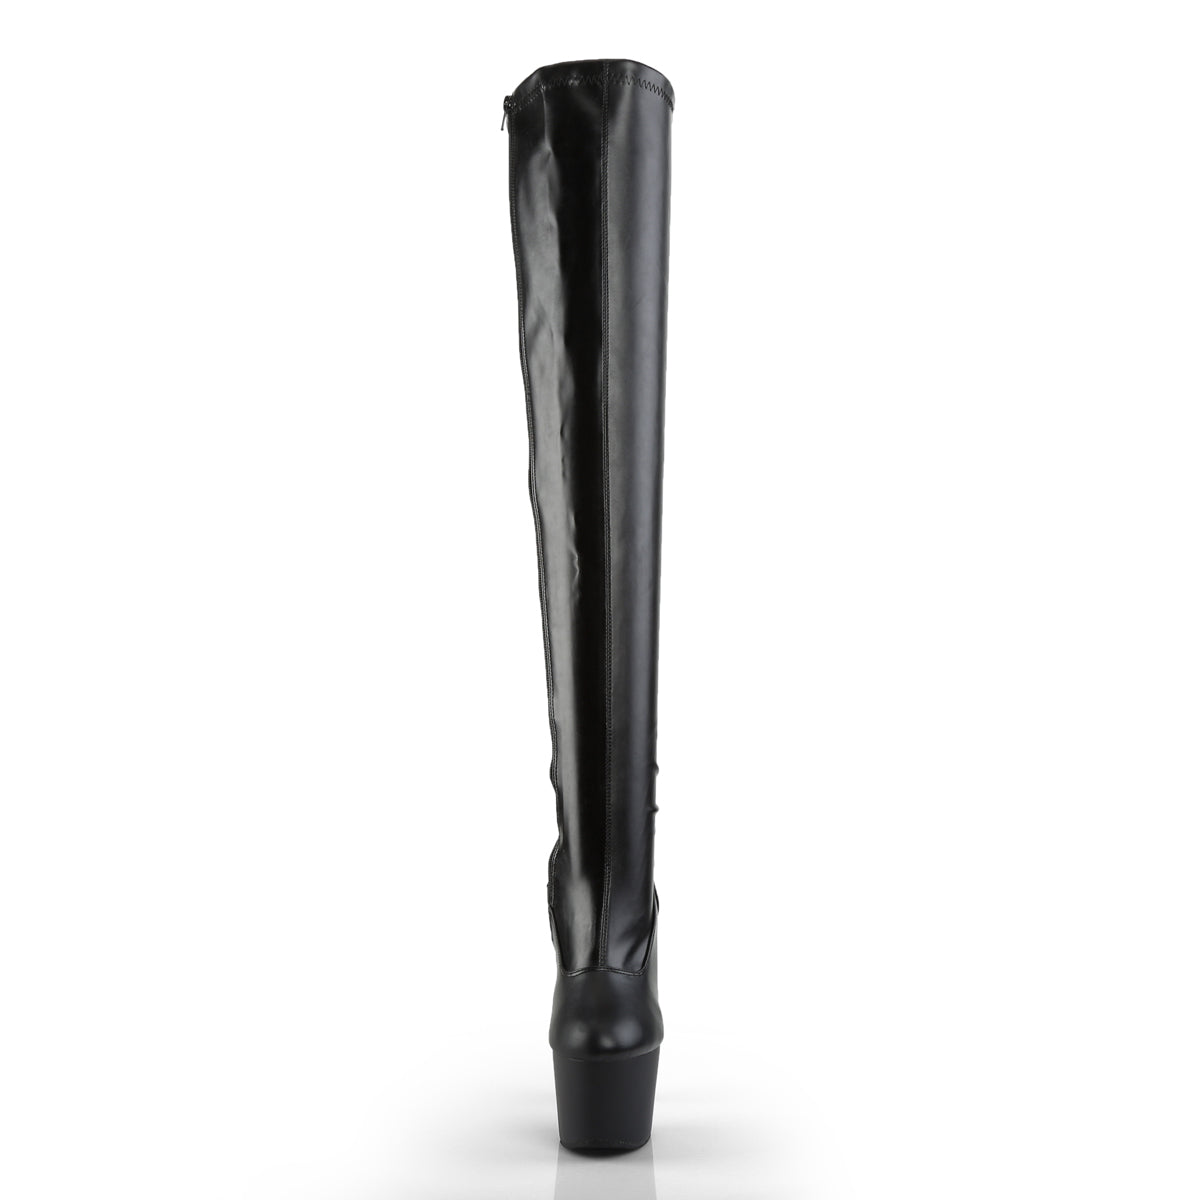 ADORE-3000 / B / PU 7 "PLEASER FAST DELIVERY 24-48h 